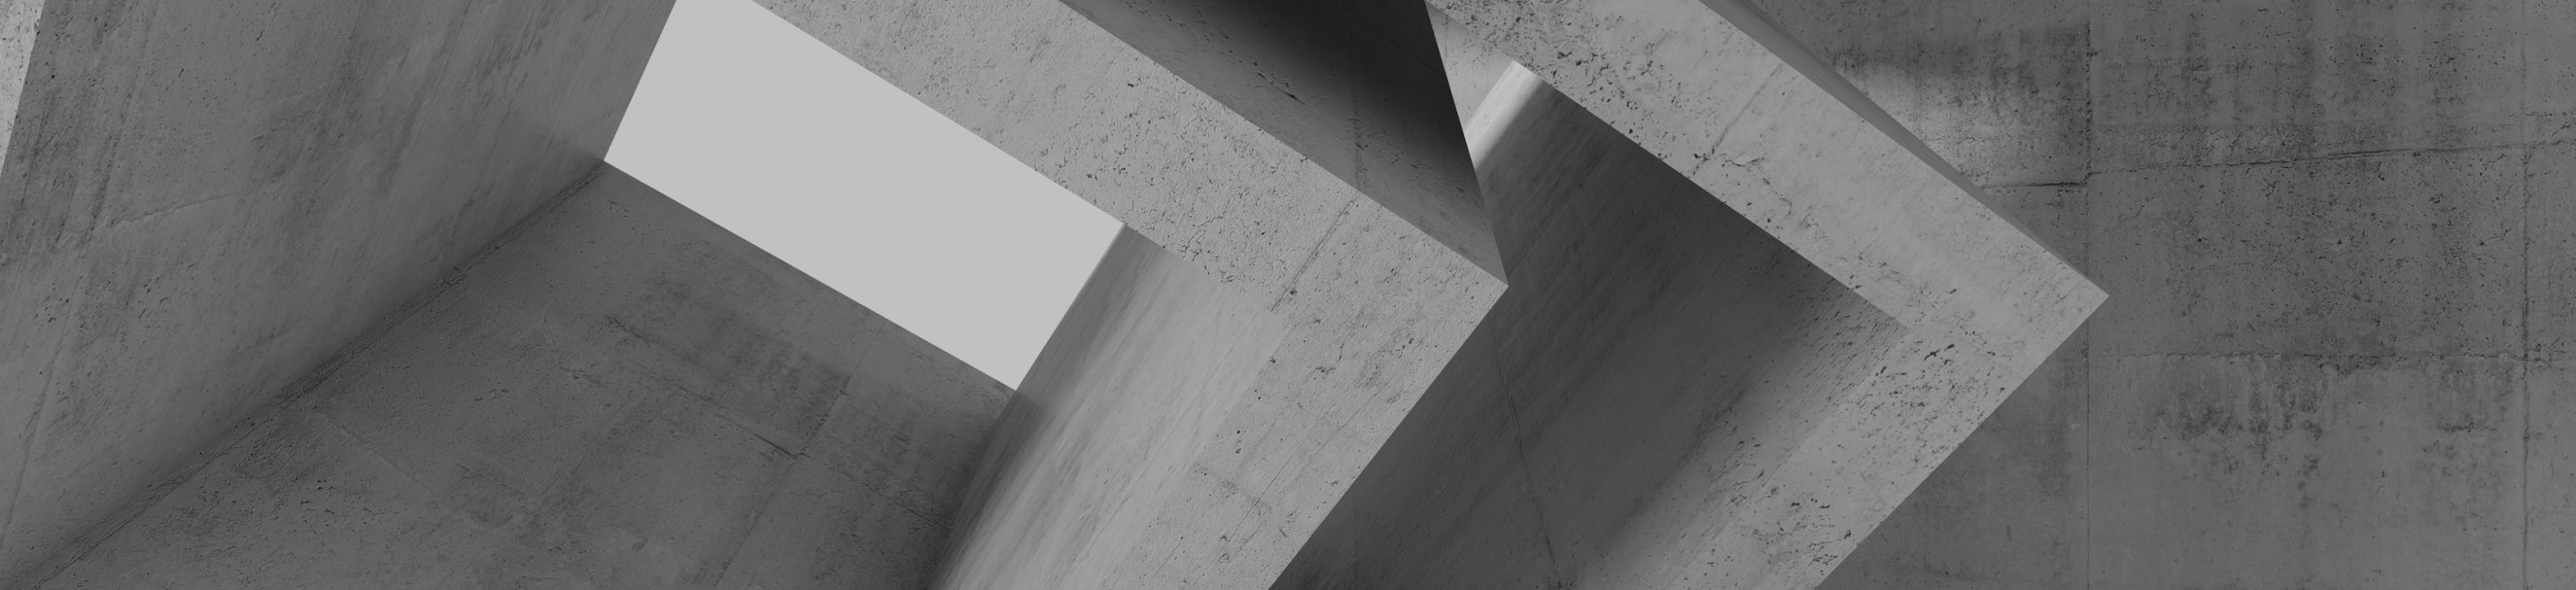 Abstract concrete shapes